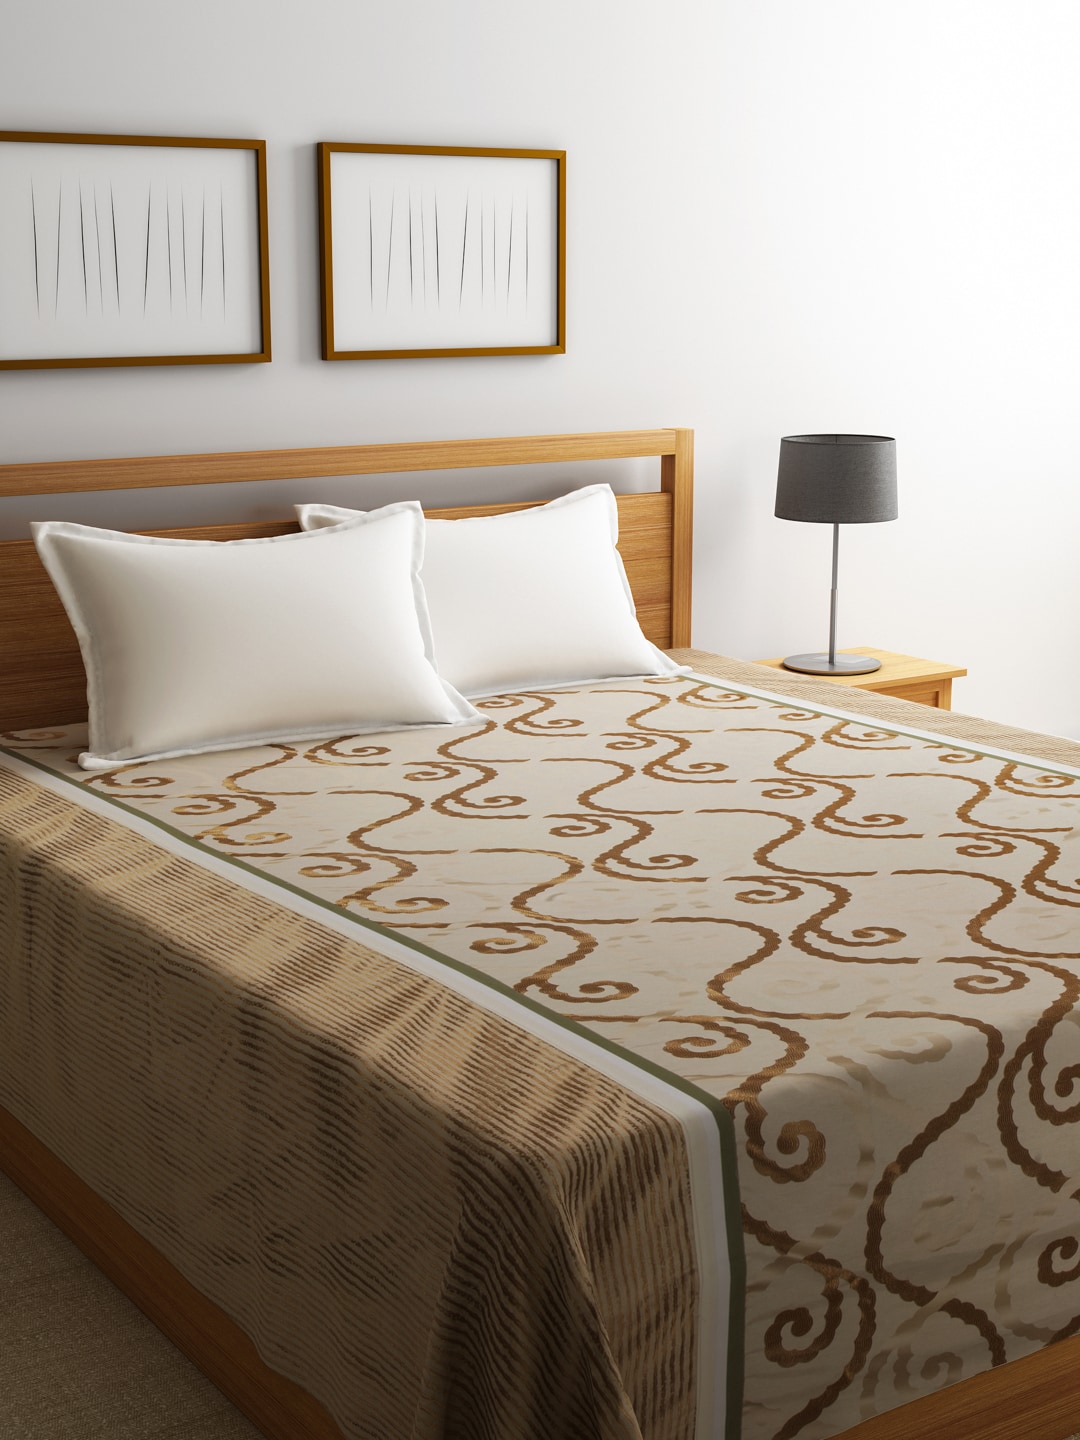 Dreamscape Brown Polycotton Printed Double Bed Cover Price in India